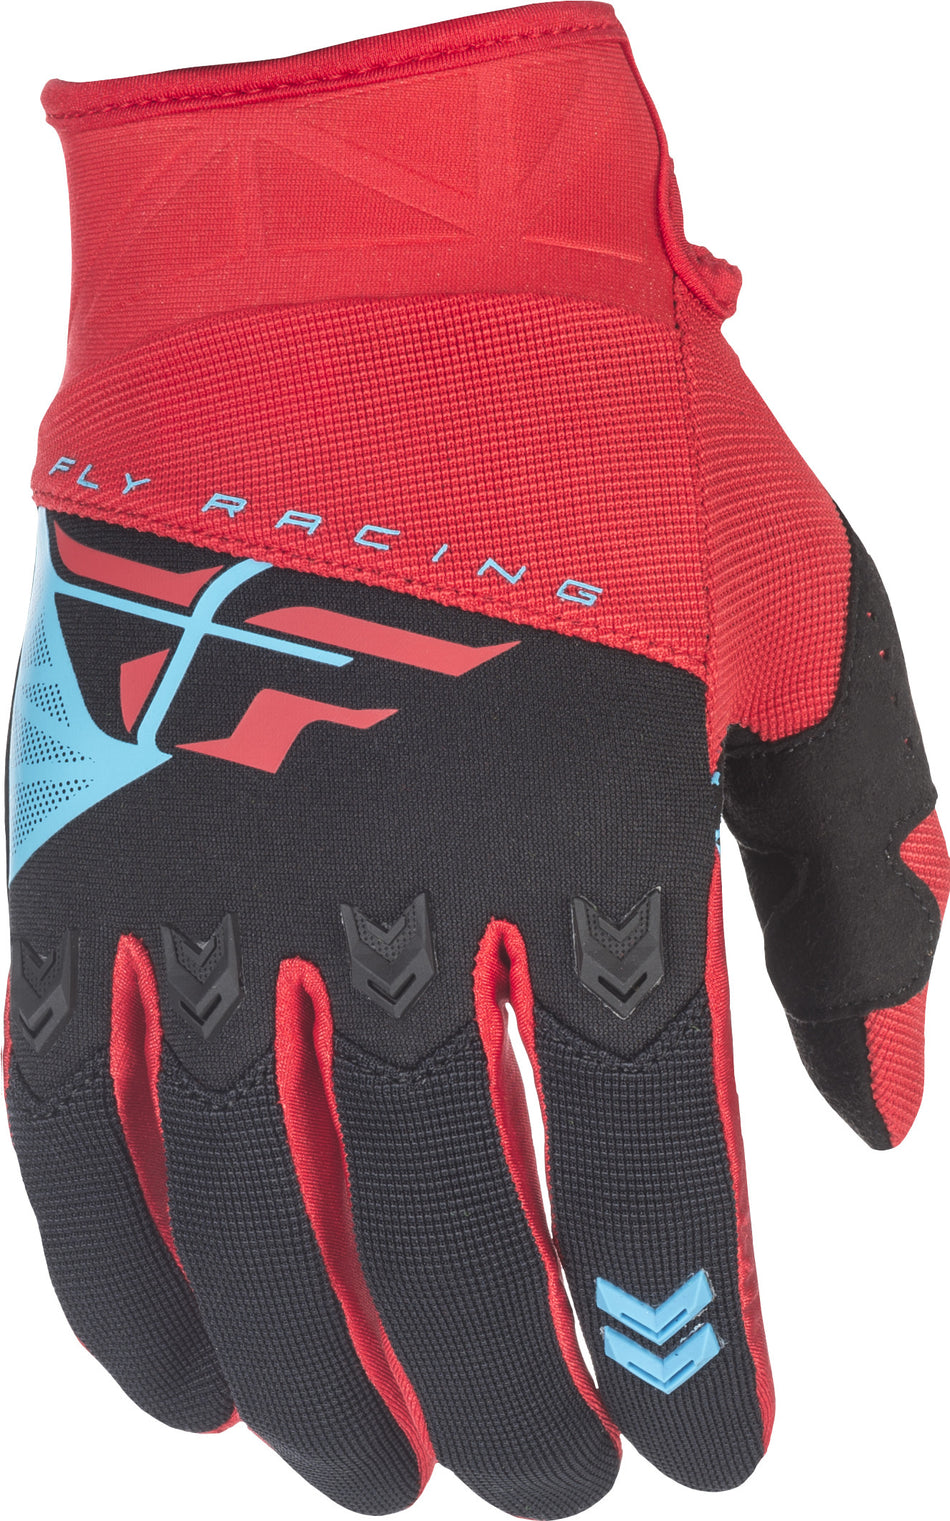 FLY RACING F-16 Gloves Red/Black Sz 11 371-91211